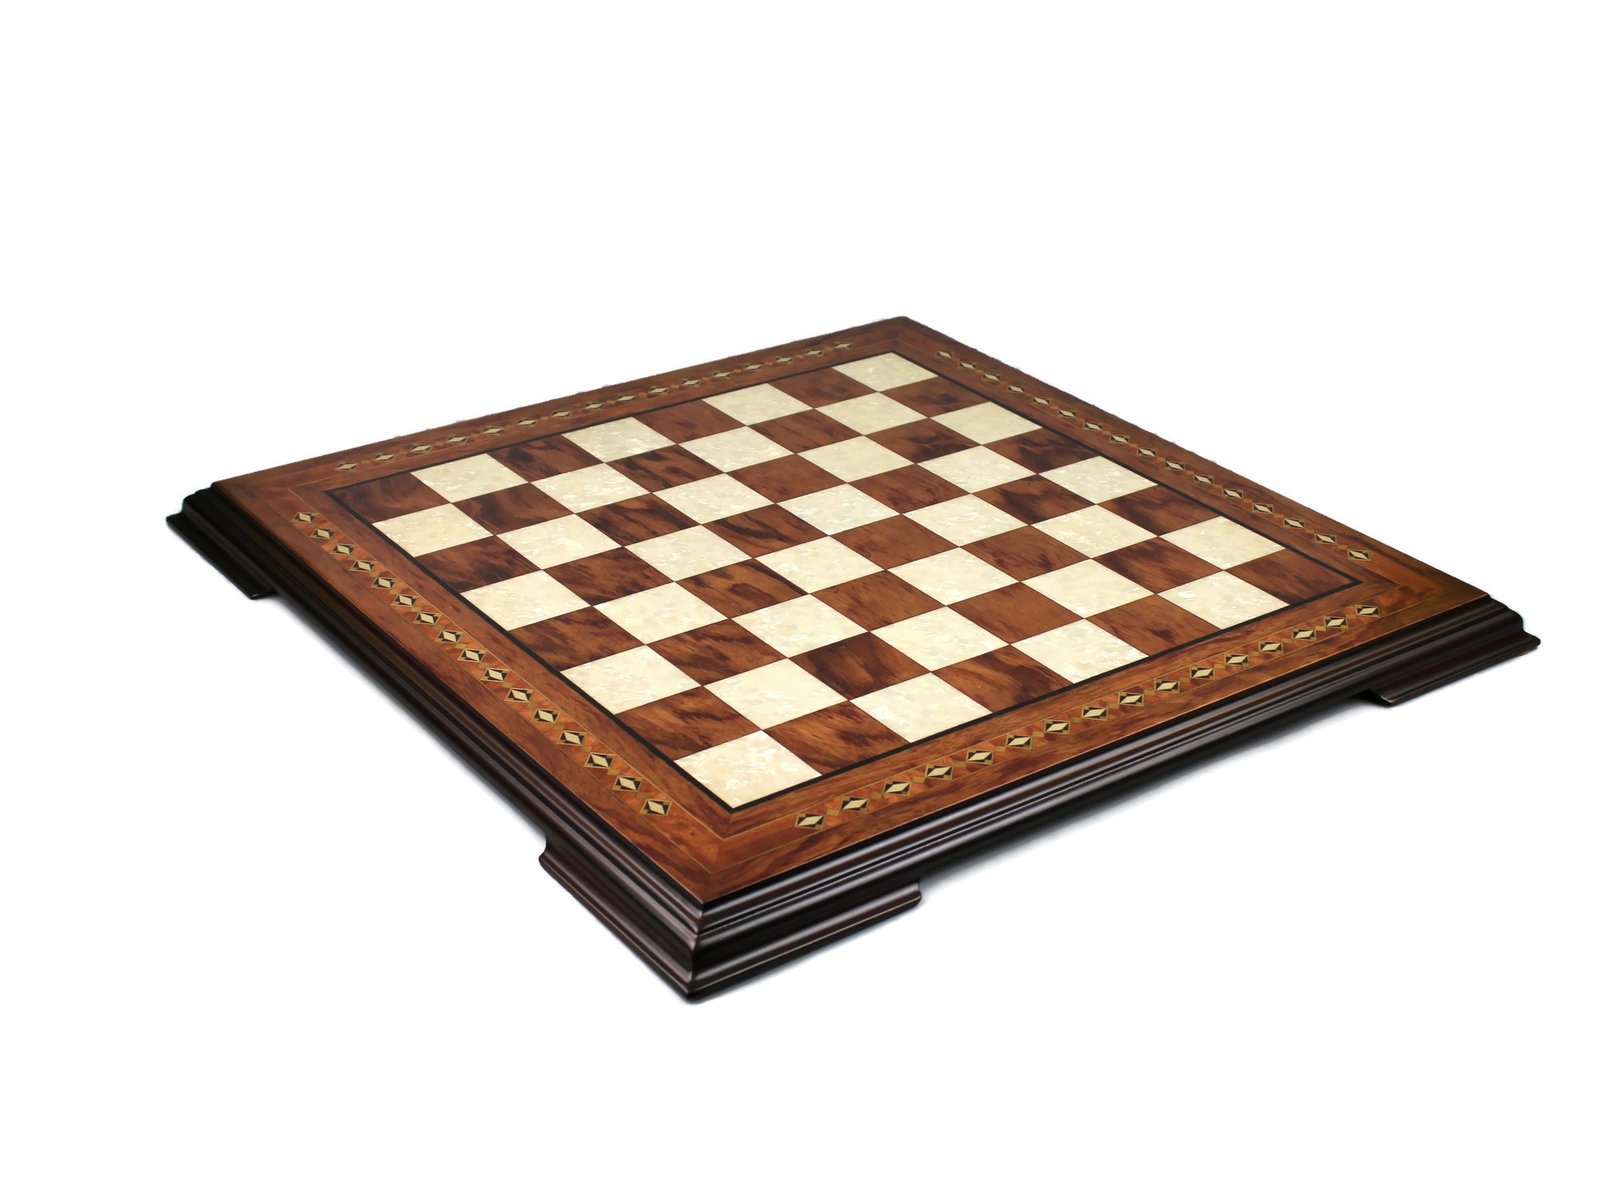 Rosewood chess set with mother of pearl inlay, all offered with free delivery in the united kingdom